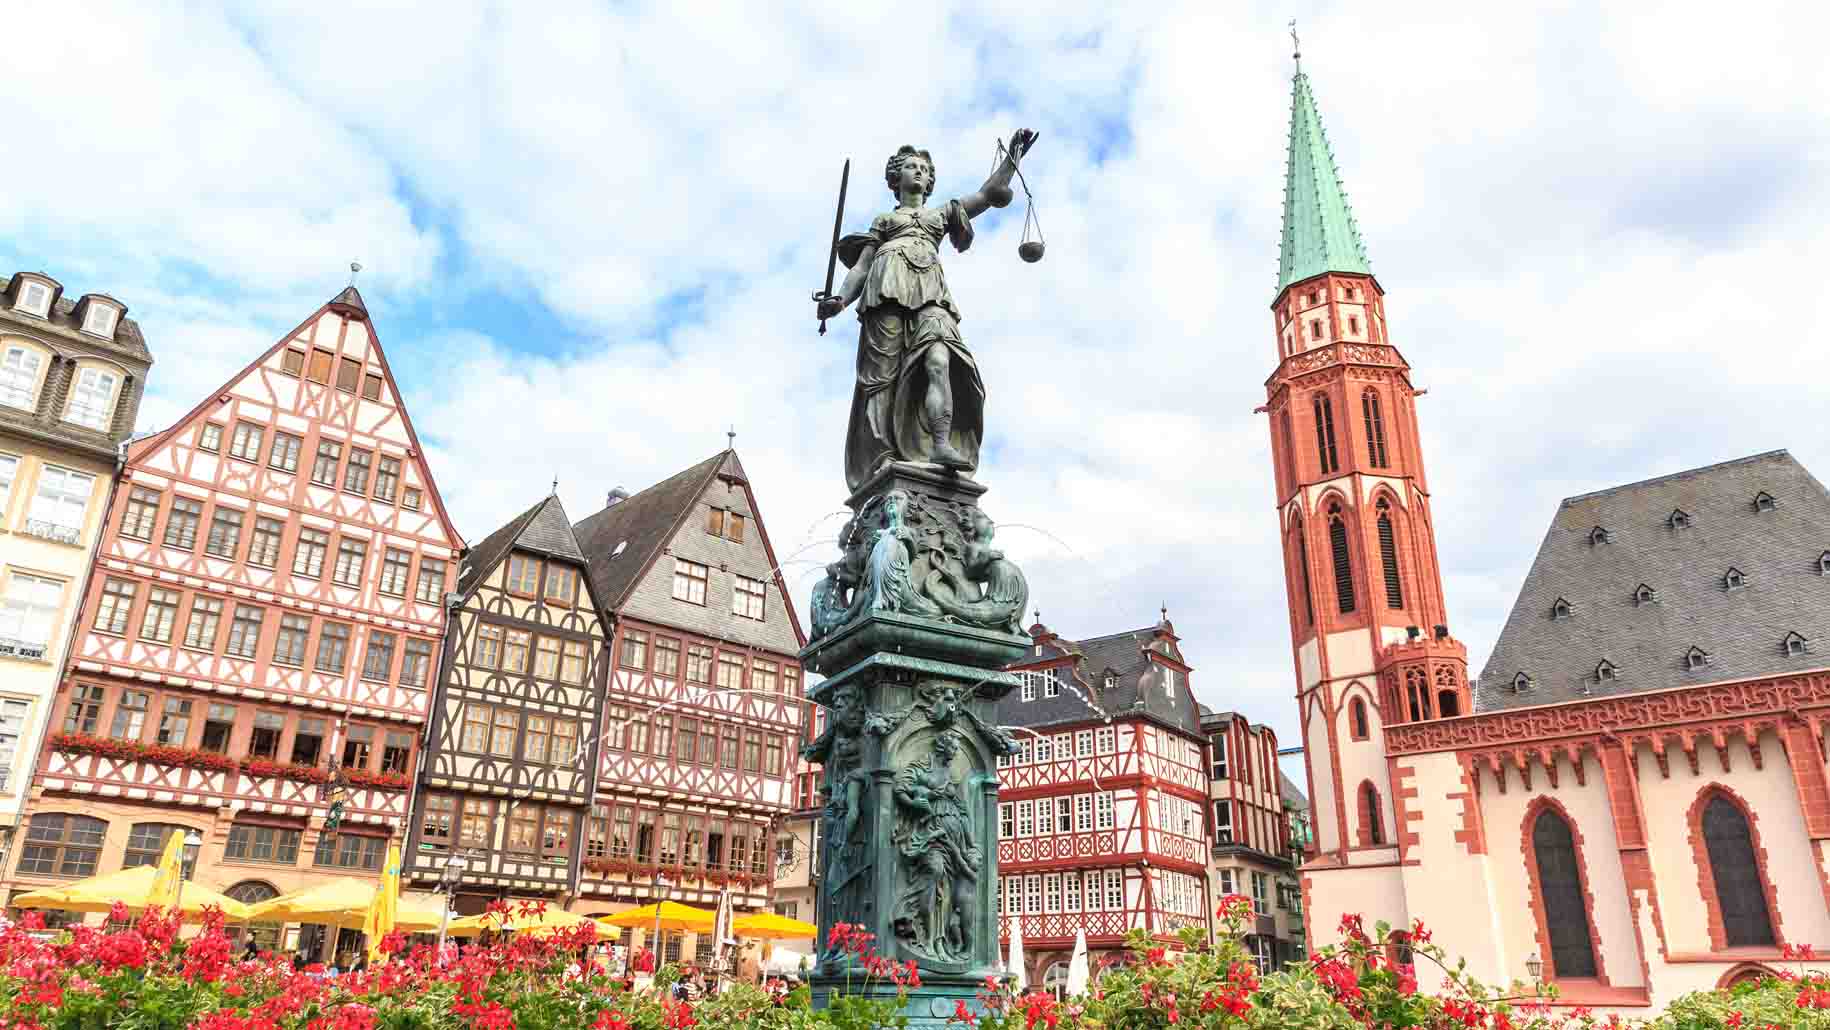 Old town square romerberg with Justitia statue in Frankfurt Germany